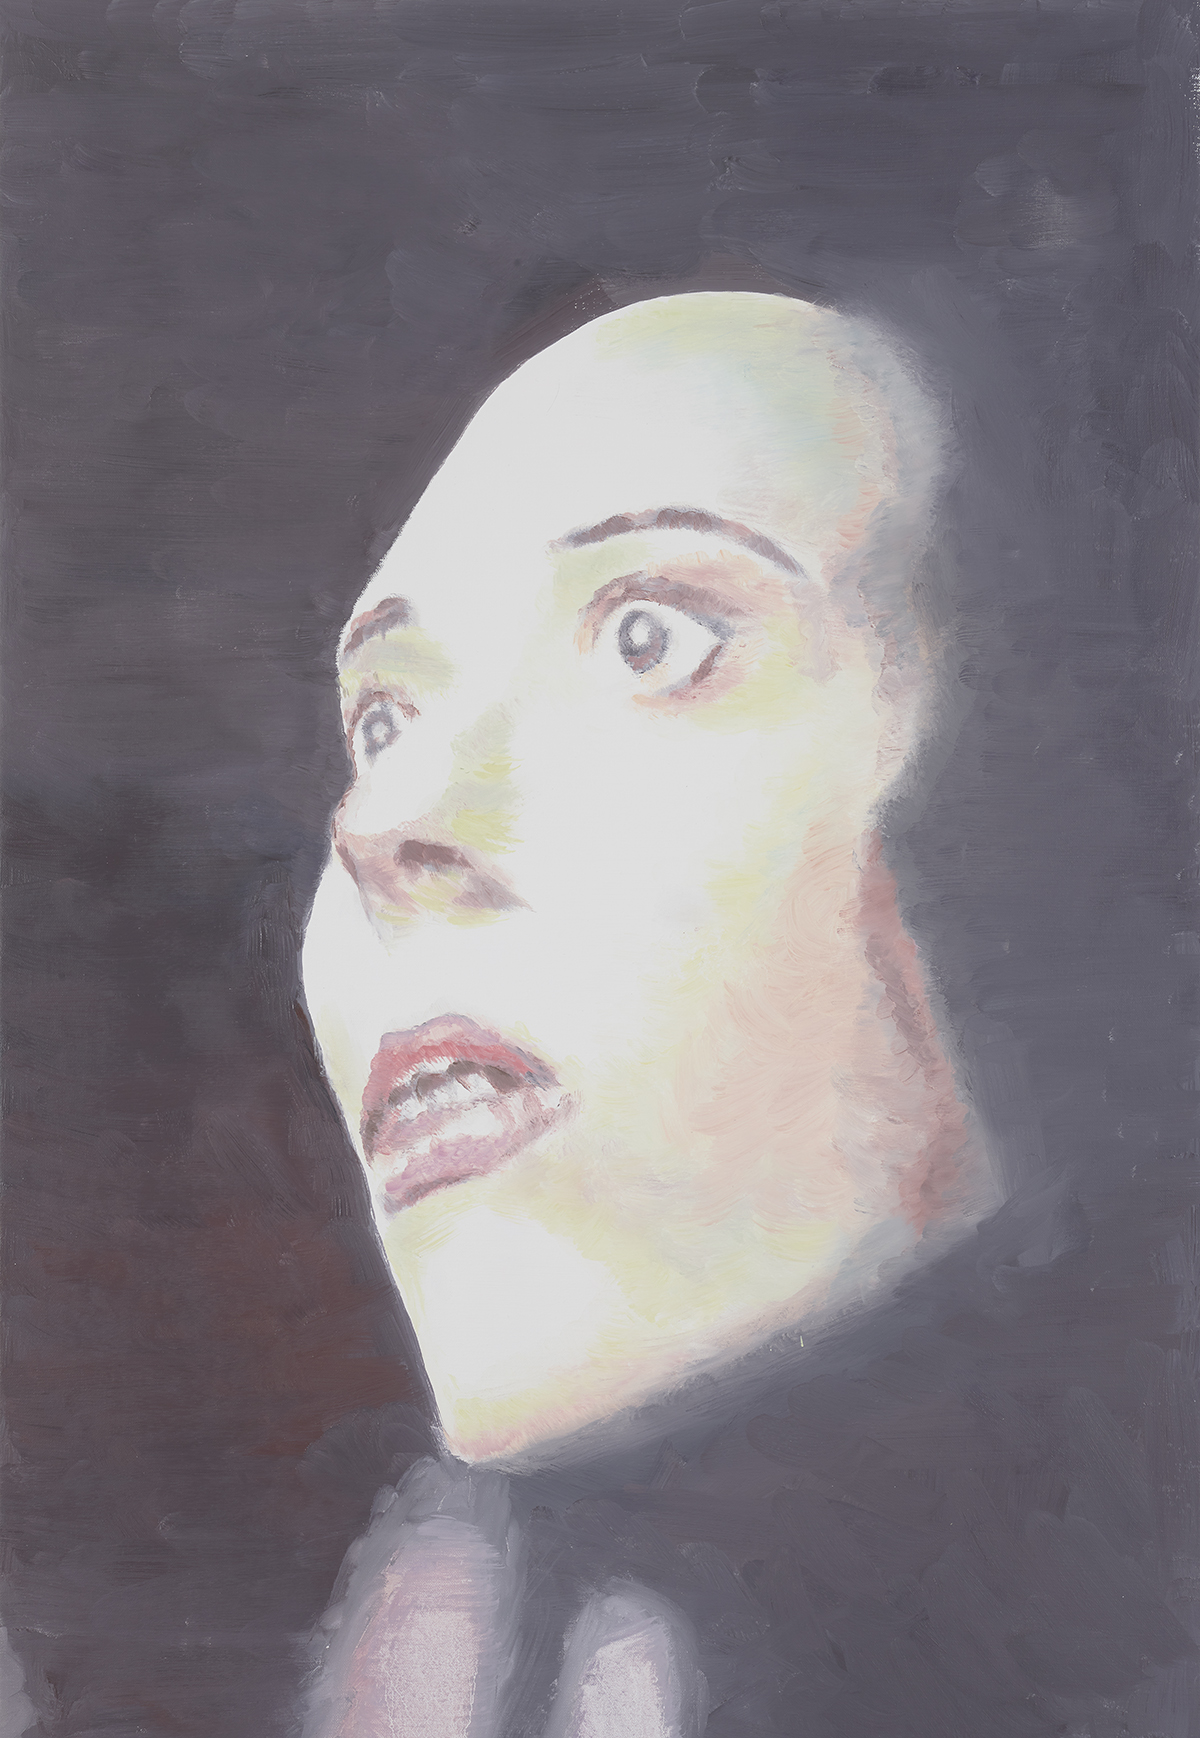 Portrait painting of a woman's face